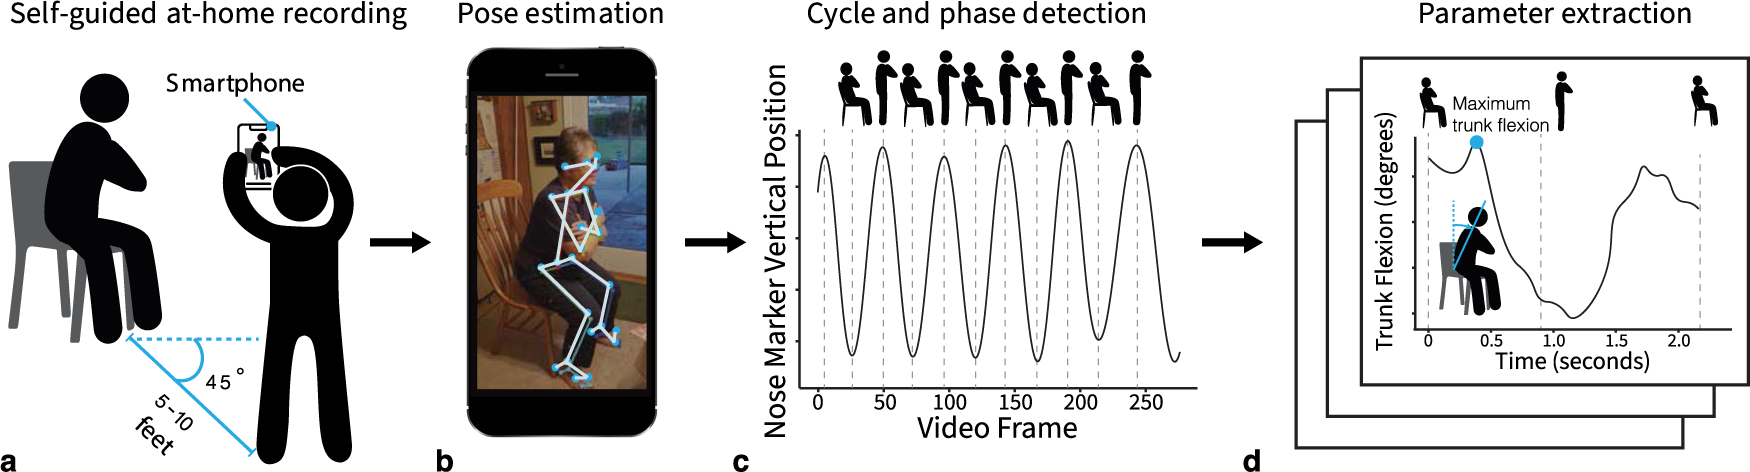 Smartphone videos of the sit-to-stand test predict osteoarthritis and health outcomes in a nationwide study npj Digital Medicine